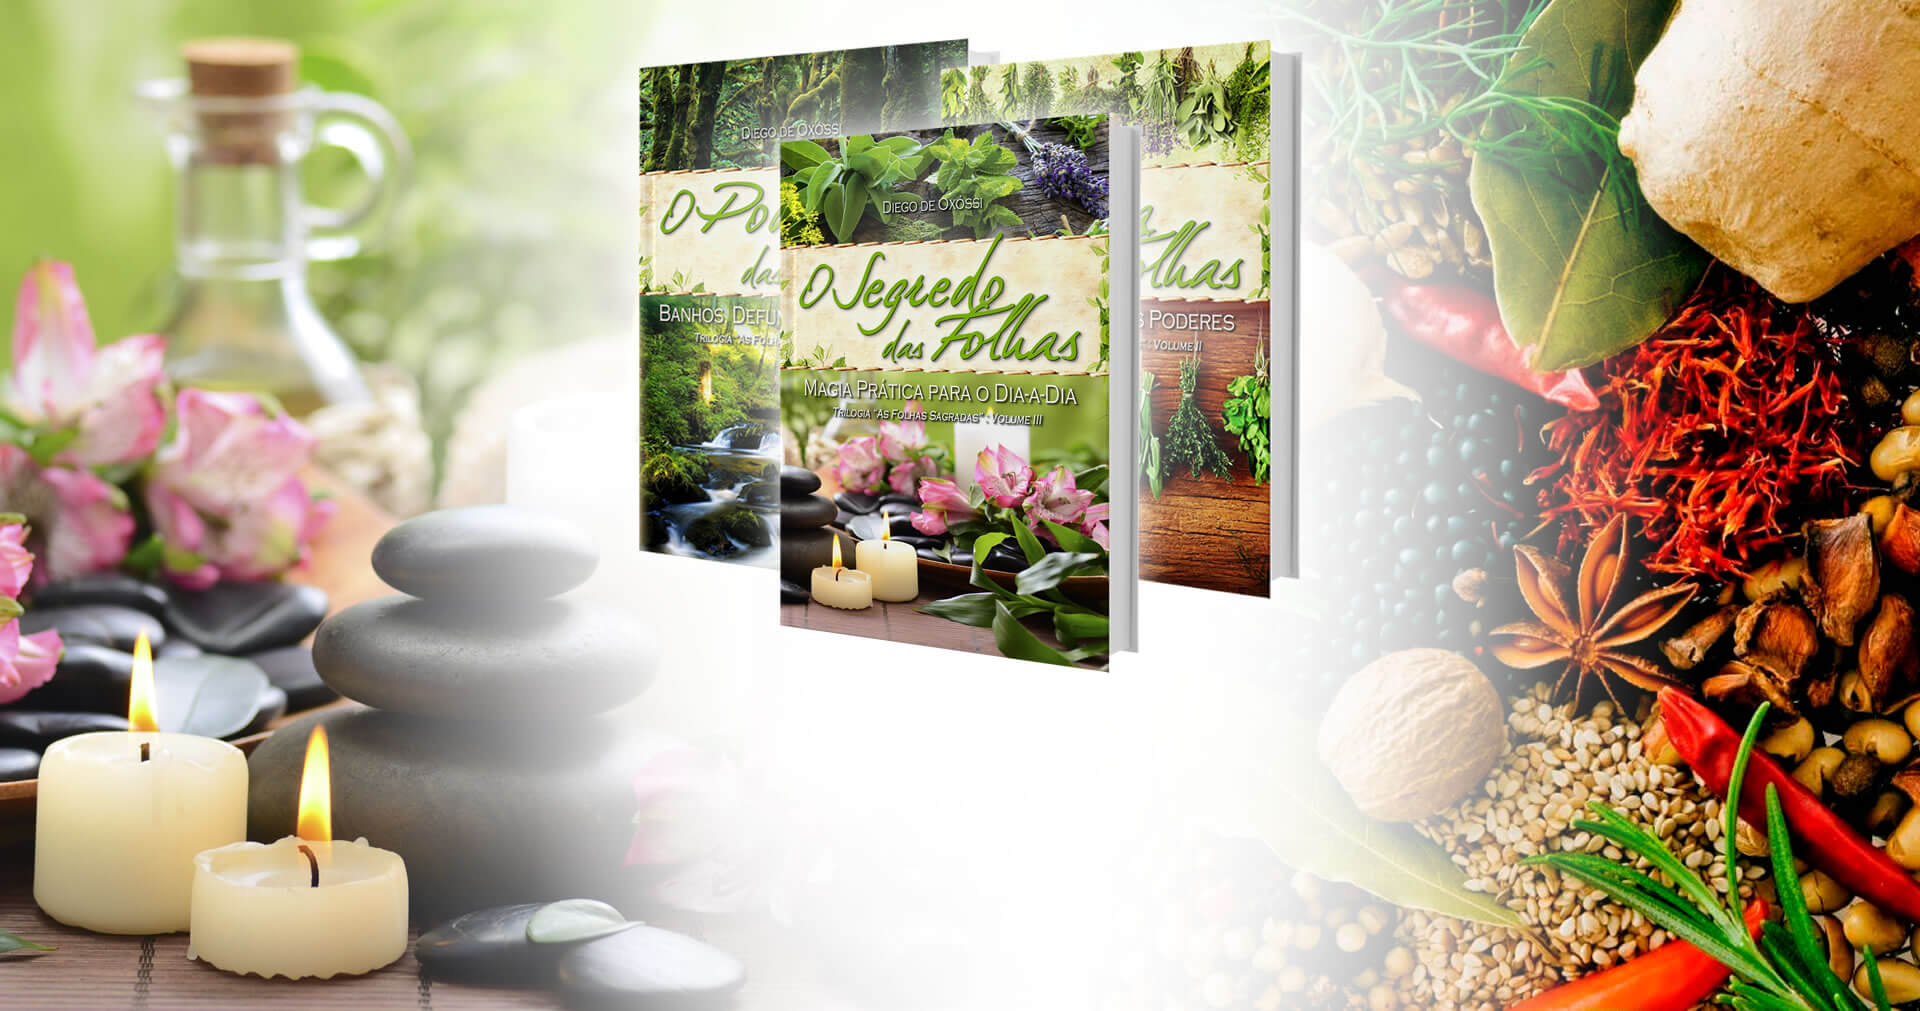 Orixás Para Crianças | In volume 2 of the collection, babalosha Diego de Oxóssi presents the biggest dictionary of magic herbs in Brazil, with 365 plants in details.